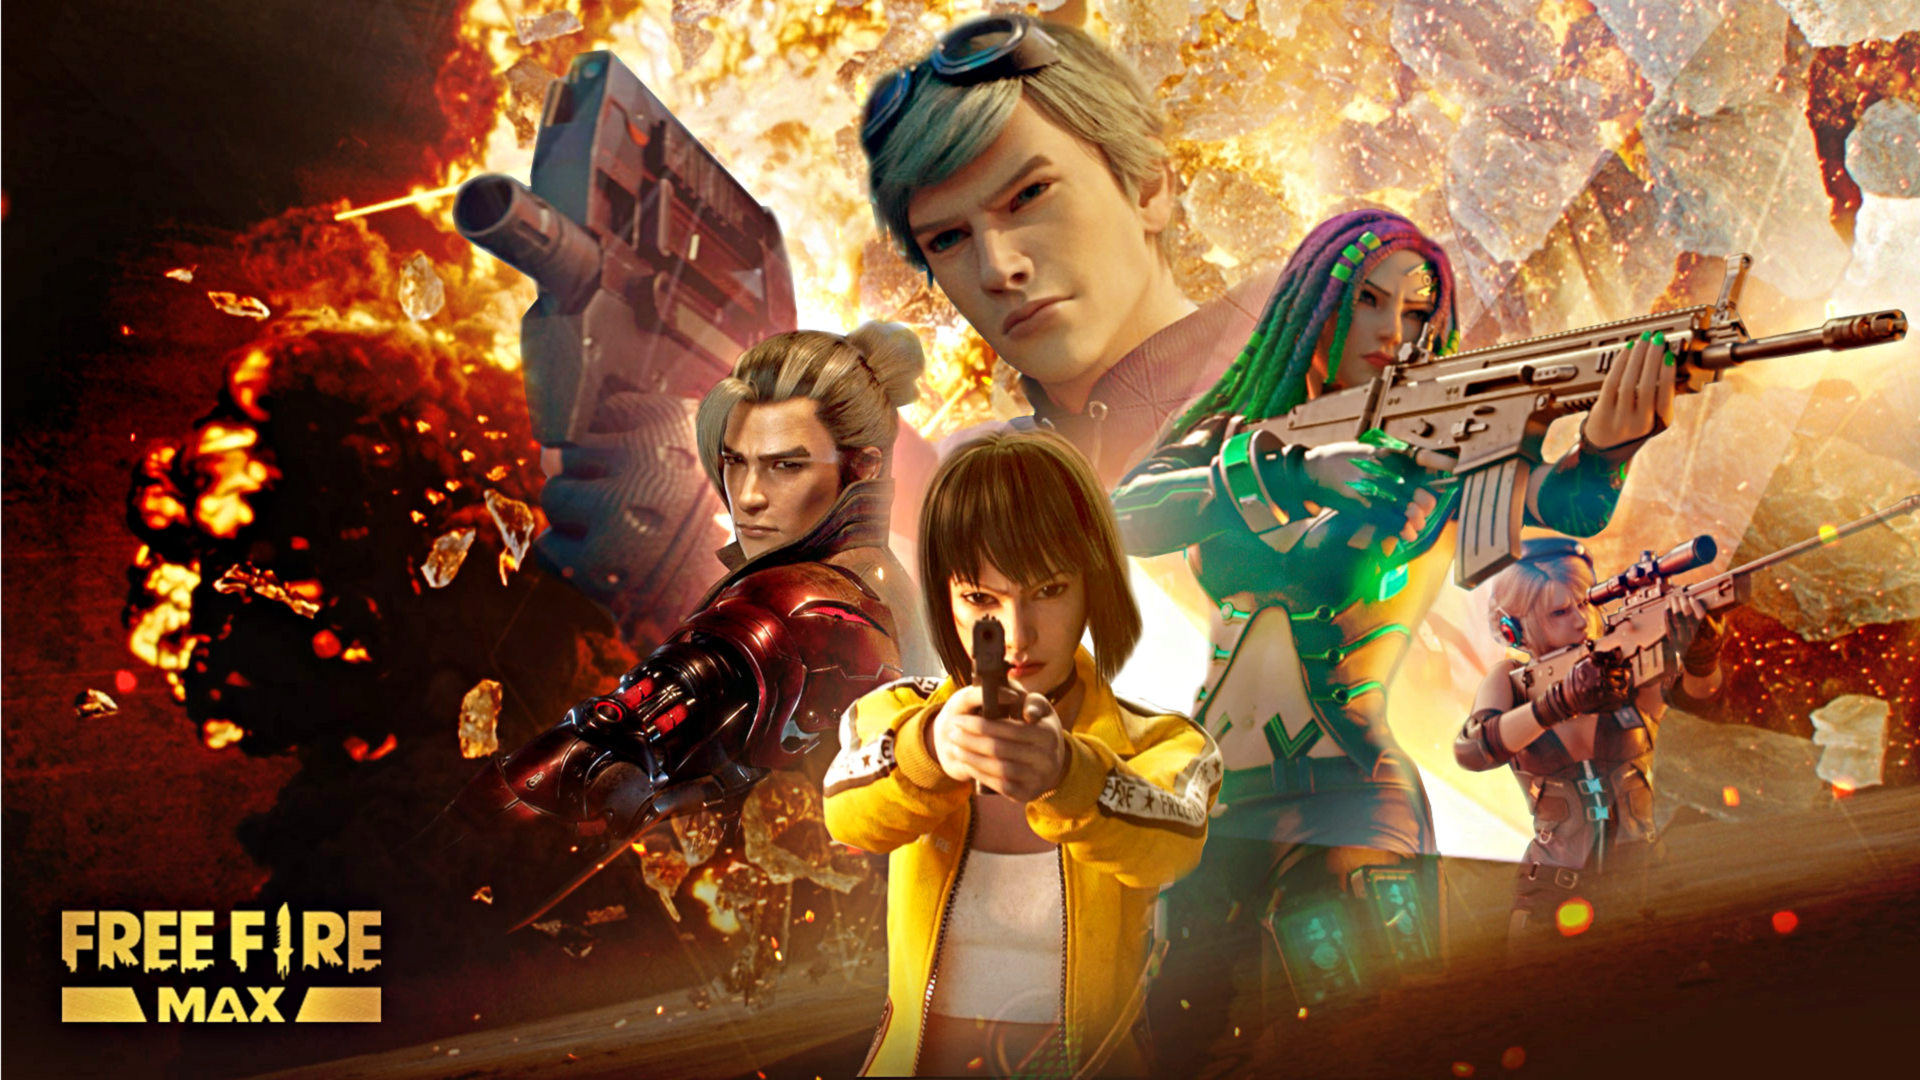 Free Fire MAX codes for May 1: How to redeem